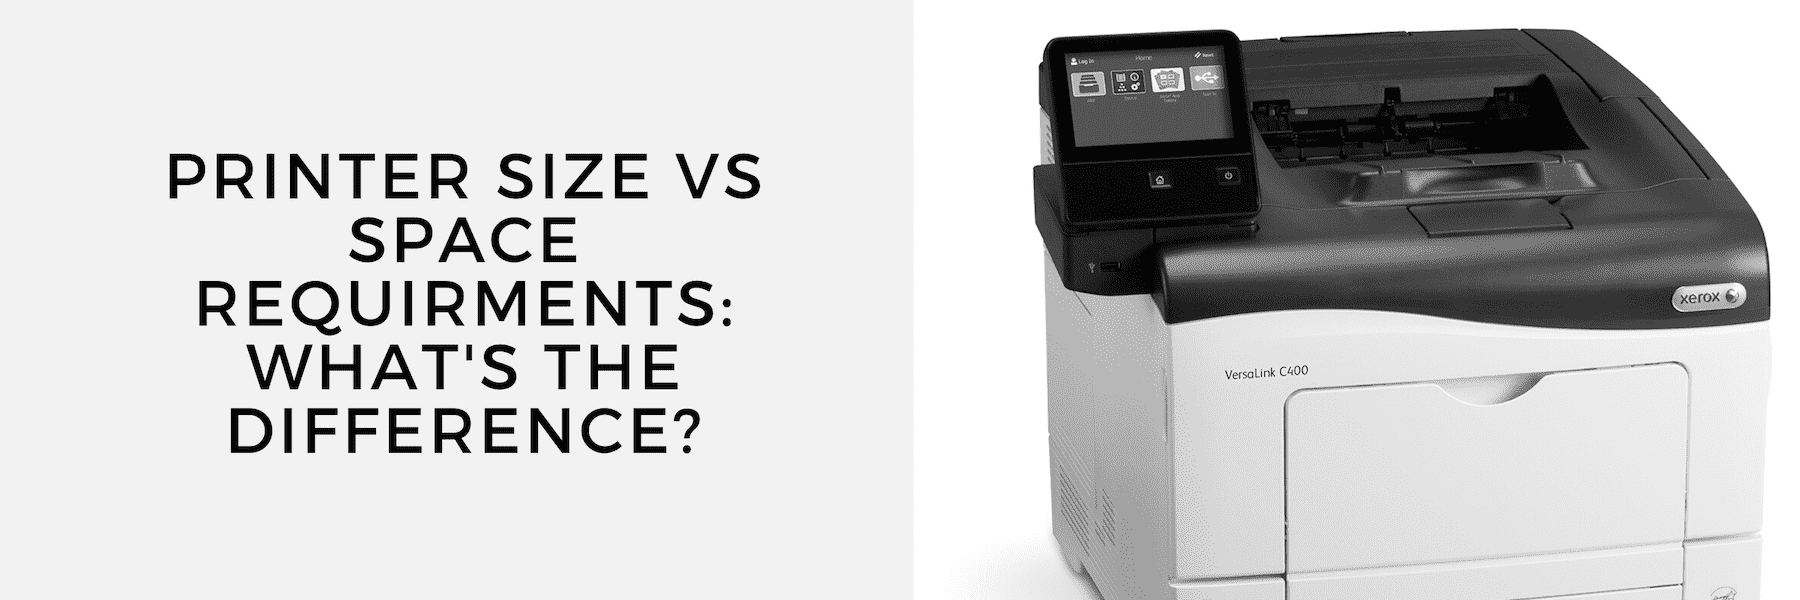 A picture of a printer next to the text "Printer Size vs. Space Requirements: What's the Difference?"